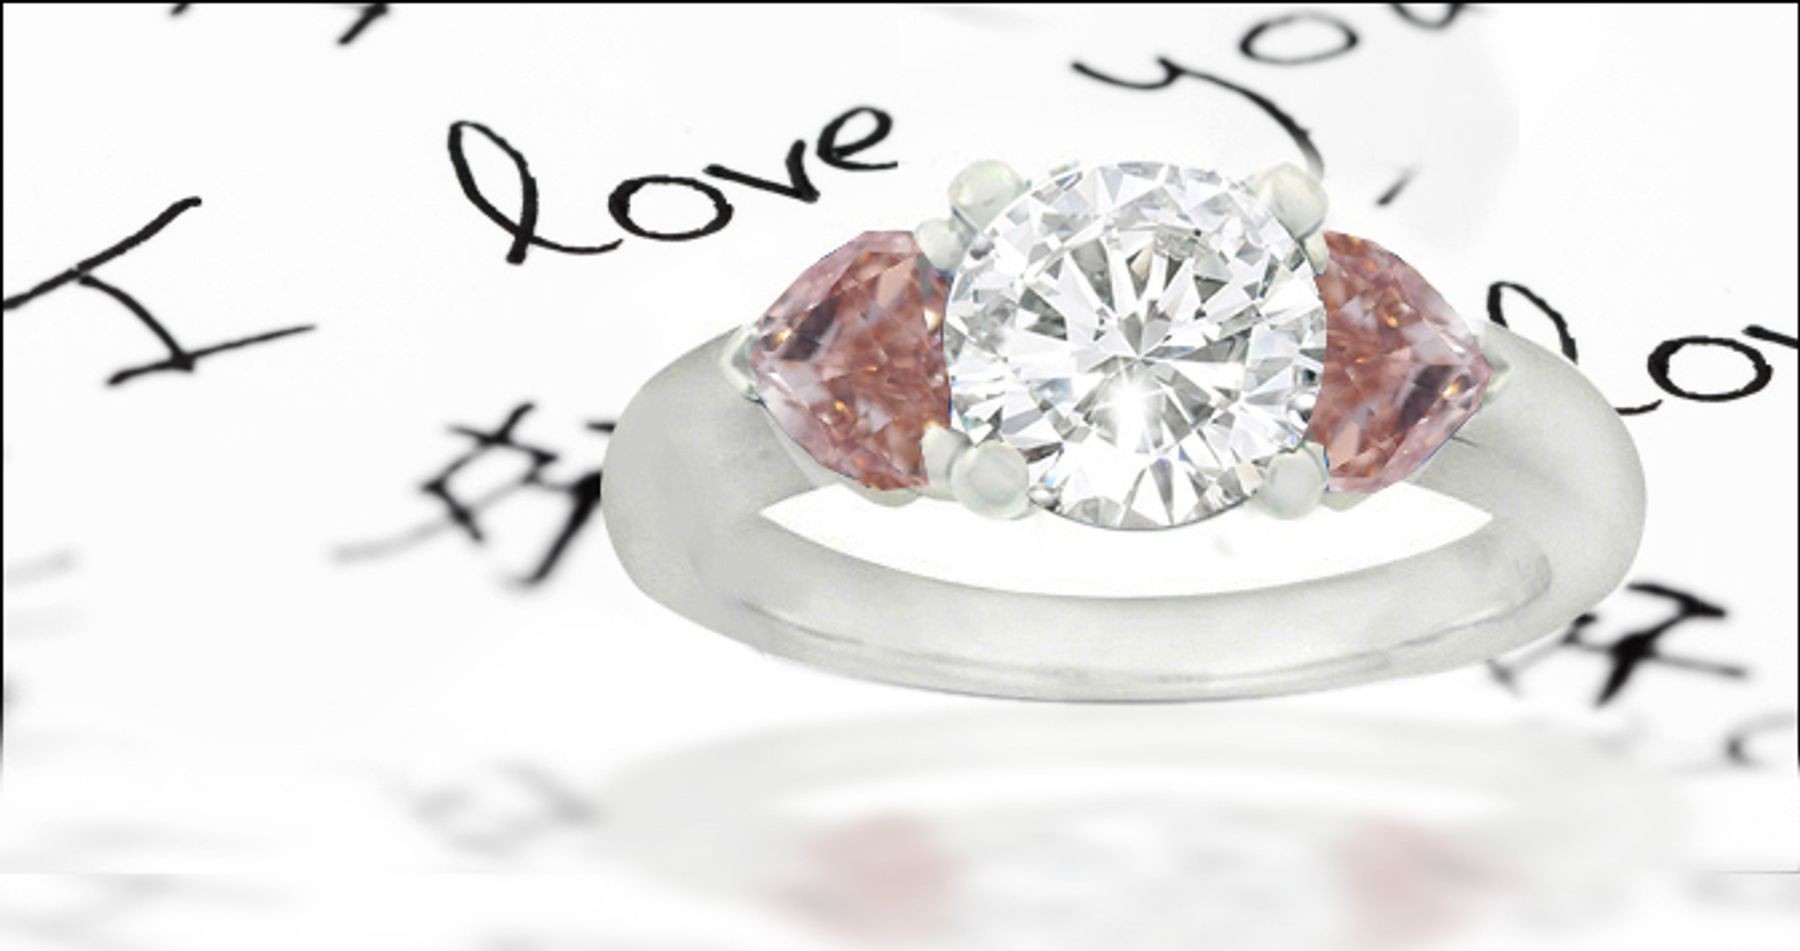 Premier Colored Diamonds Designer Collection Pink Colored Diamonds & White Diamonds Fancy Diamond Three Stone Engagement Rings